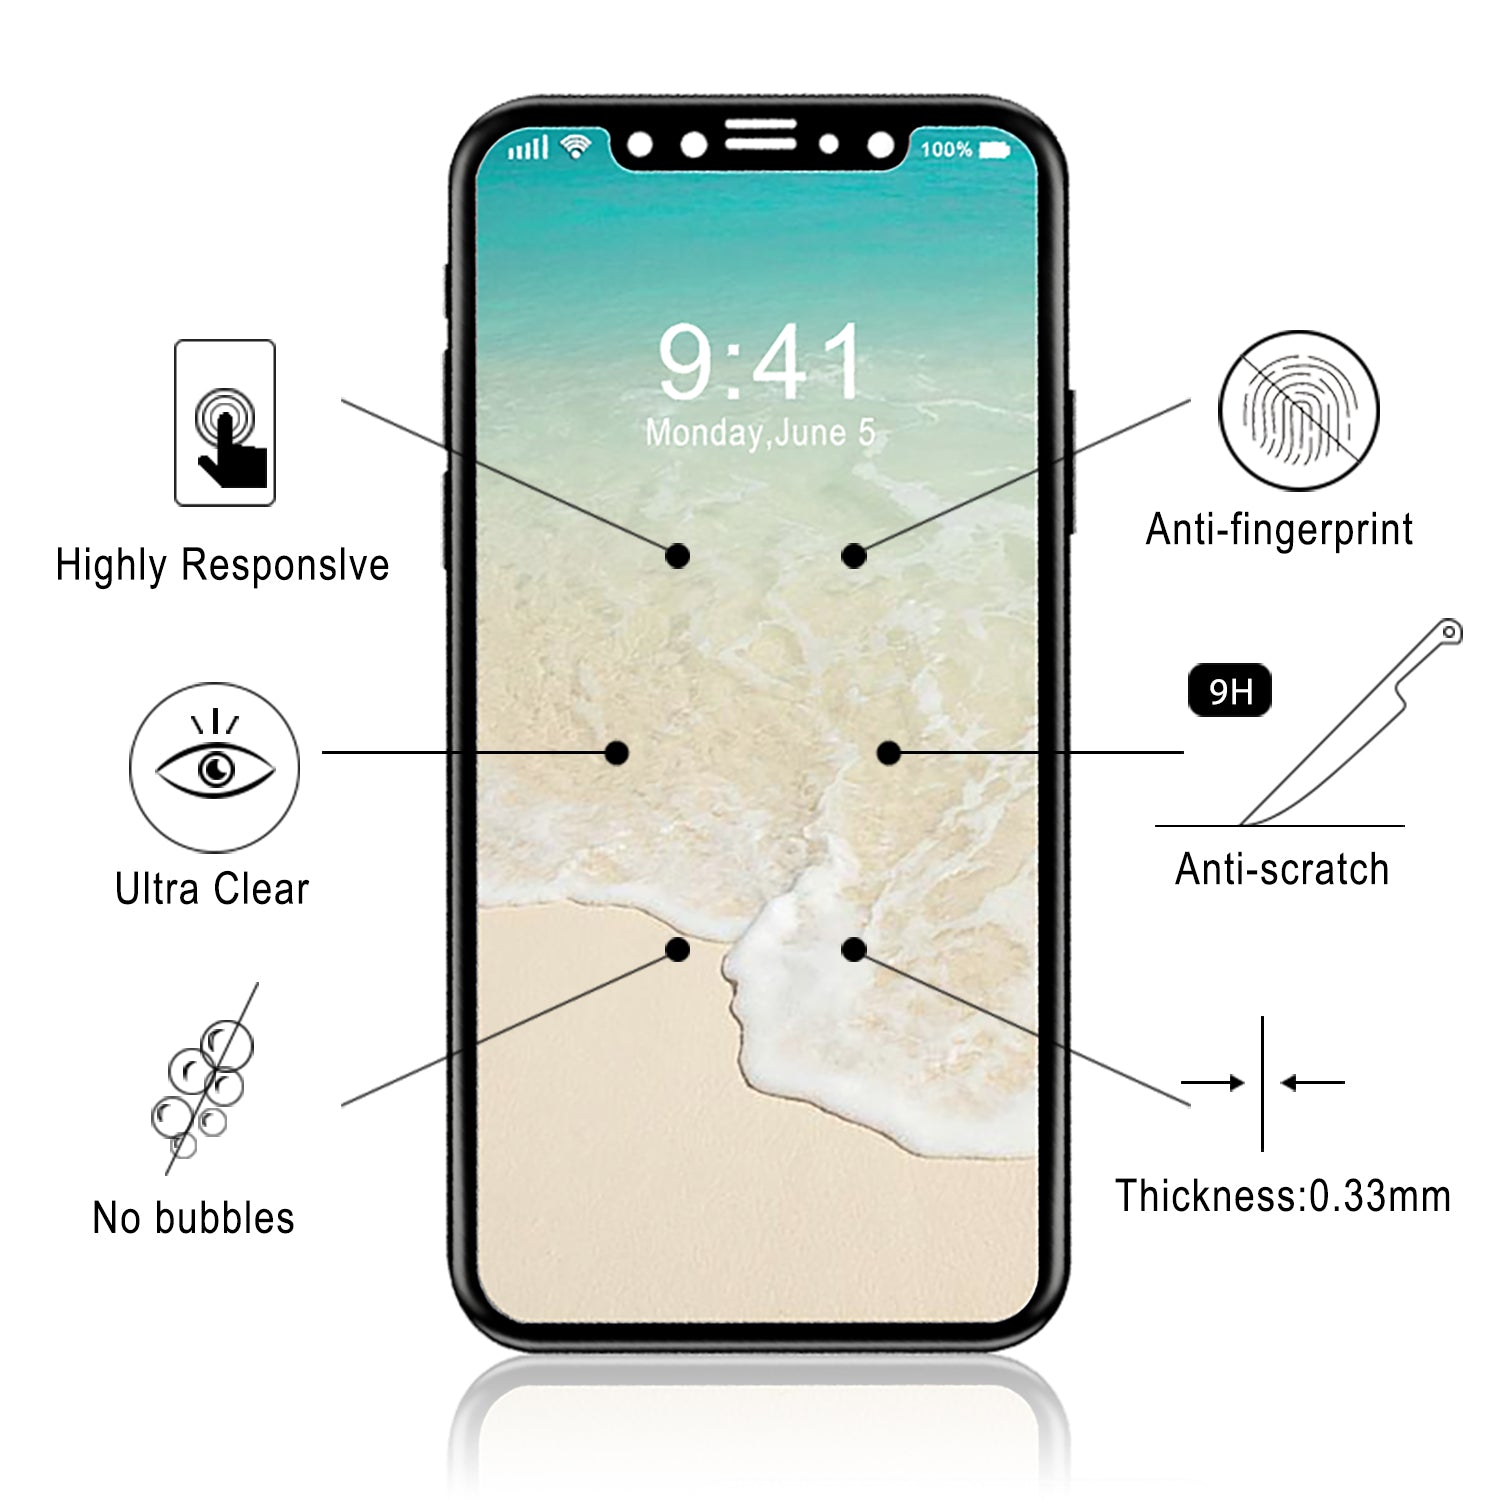 Luvvitt Tempered Glass Screen Protector 3D Case Friendly for iPhone X / XS - Black